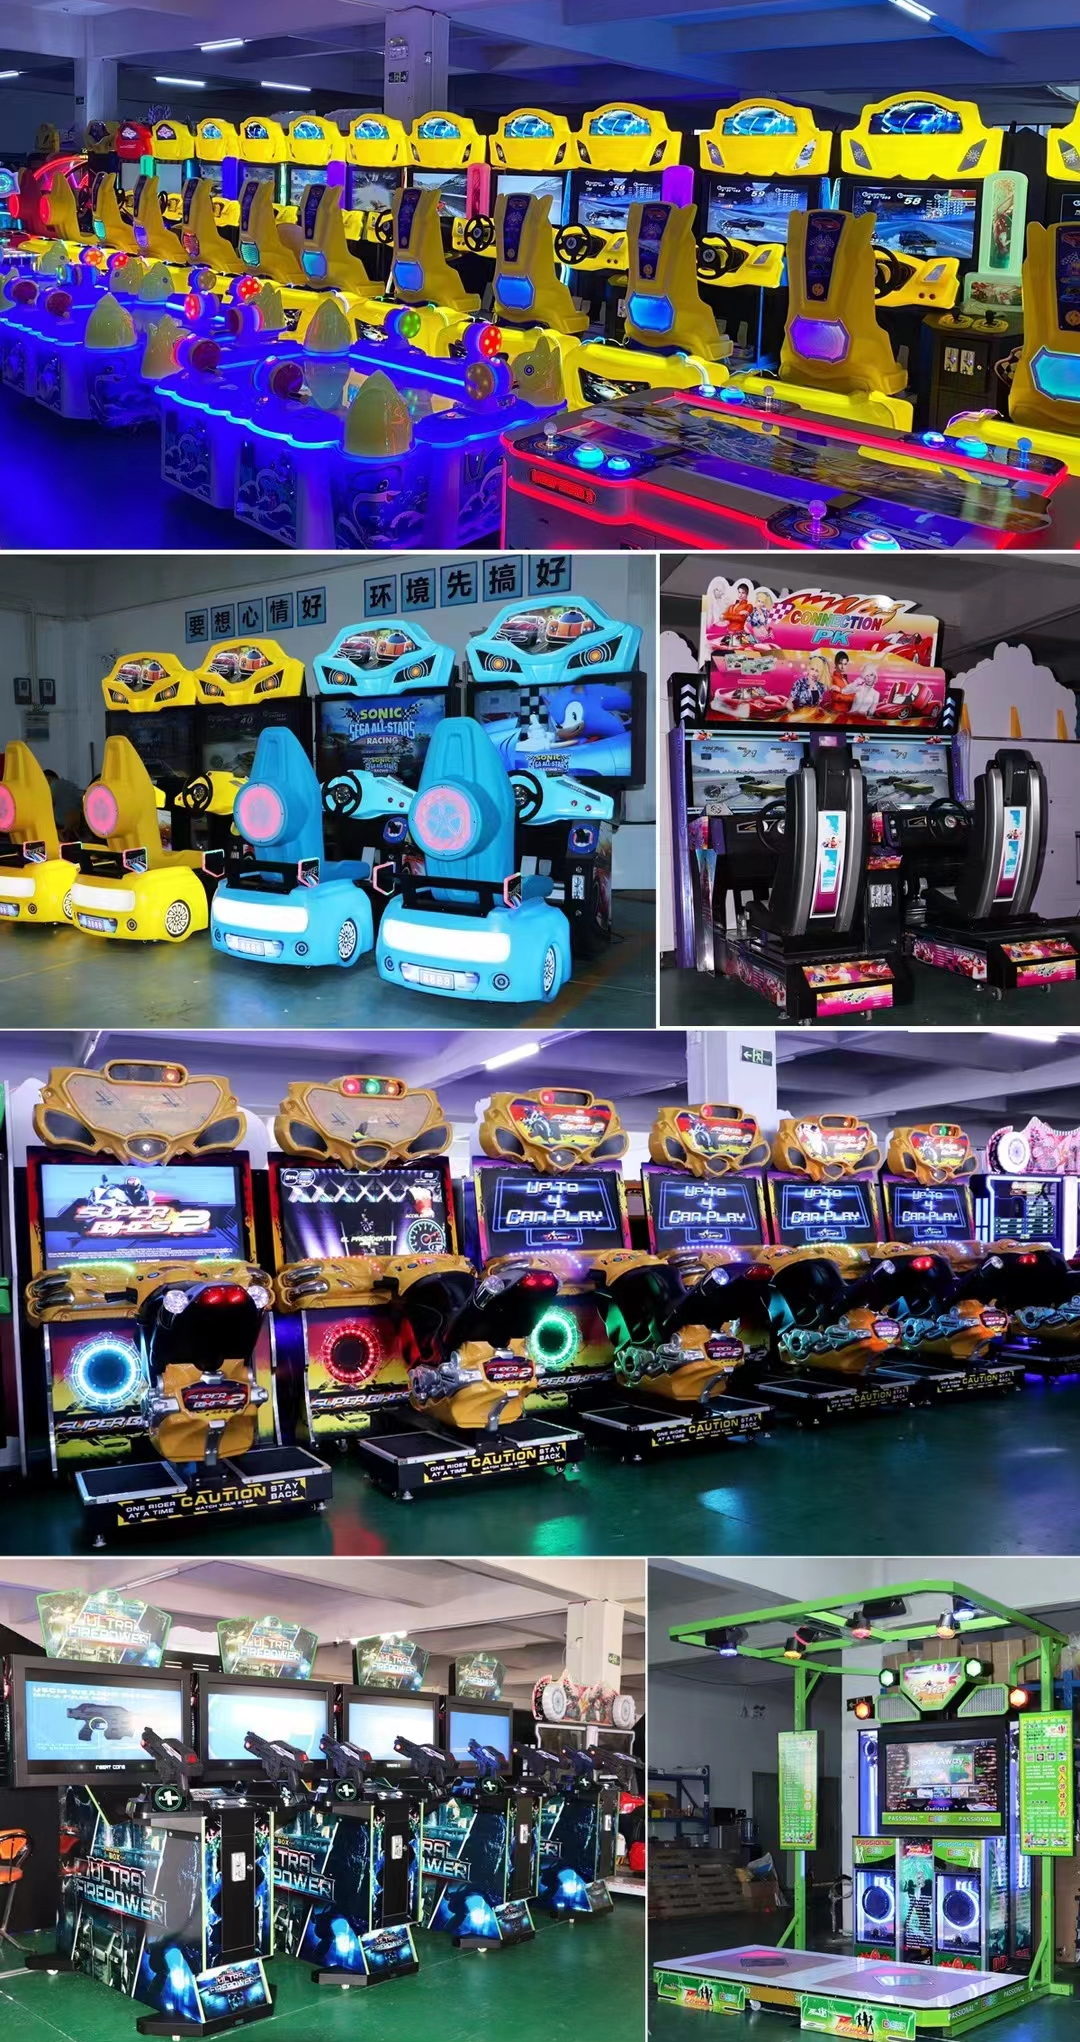 Super-Bikes-2-Motor-game-machine-RAW-Hot-Sale-FF-motor-racing-game-arcade-Coin-Operated-games-Tomy-Arcade-workshop-process